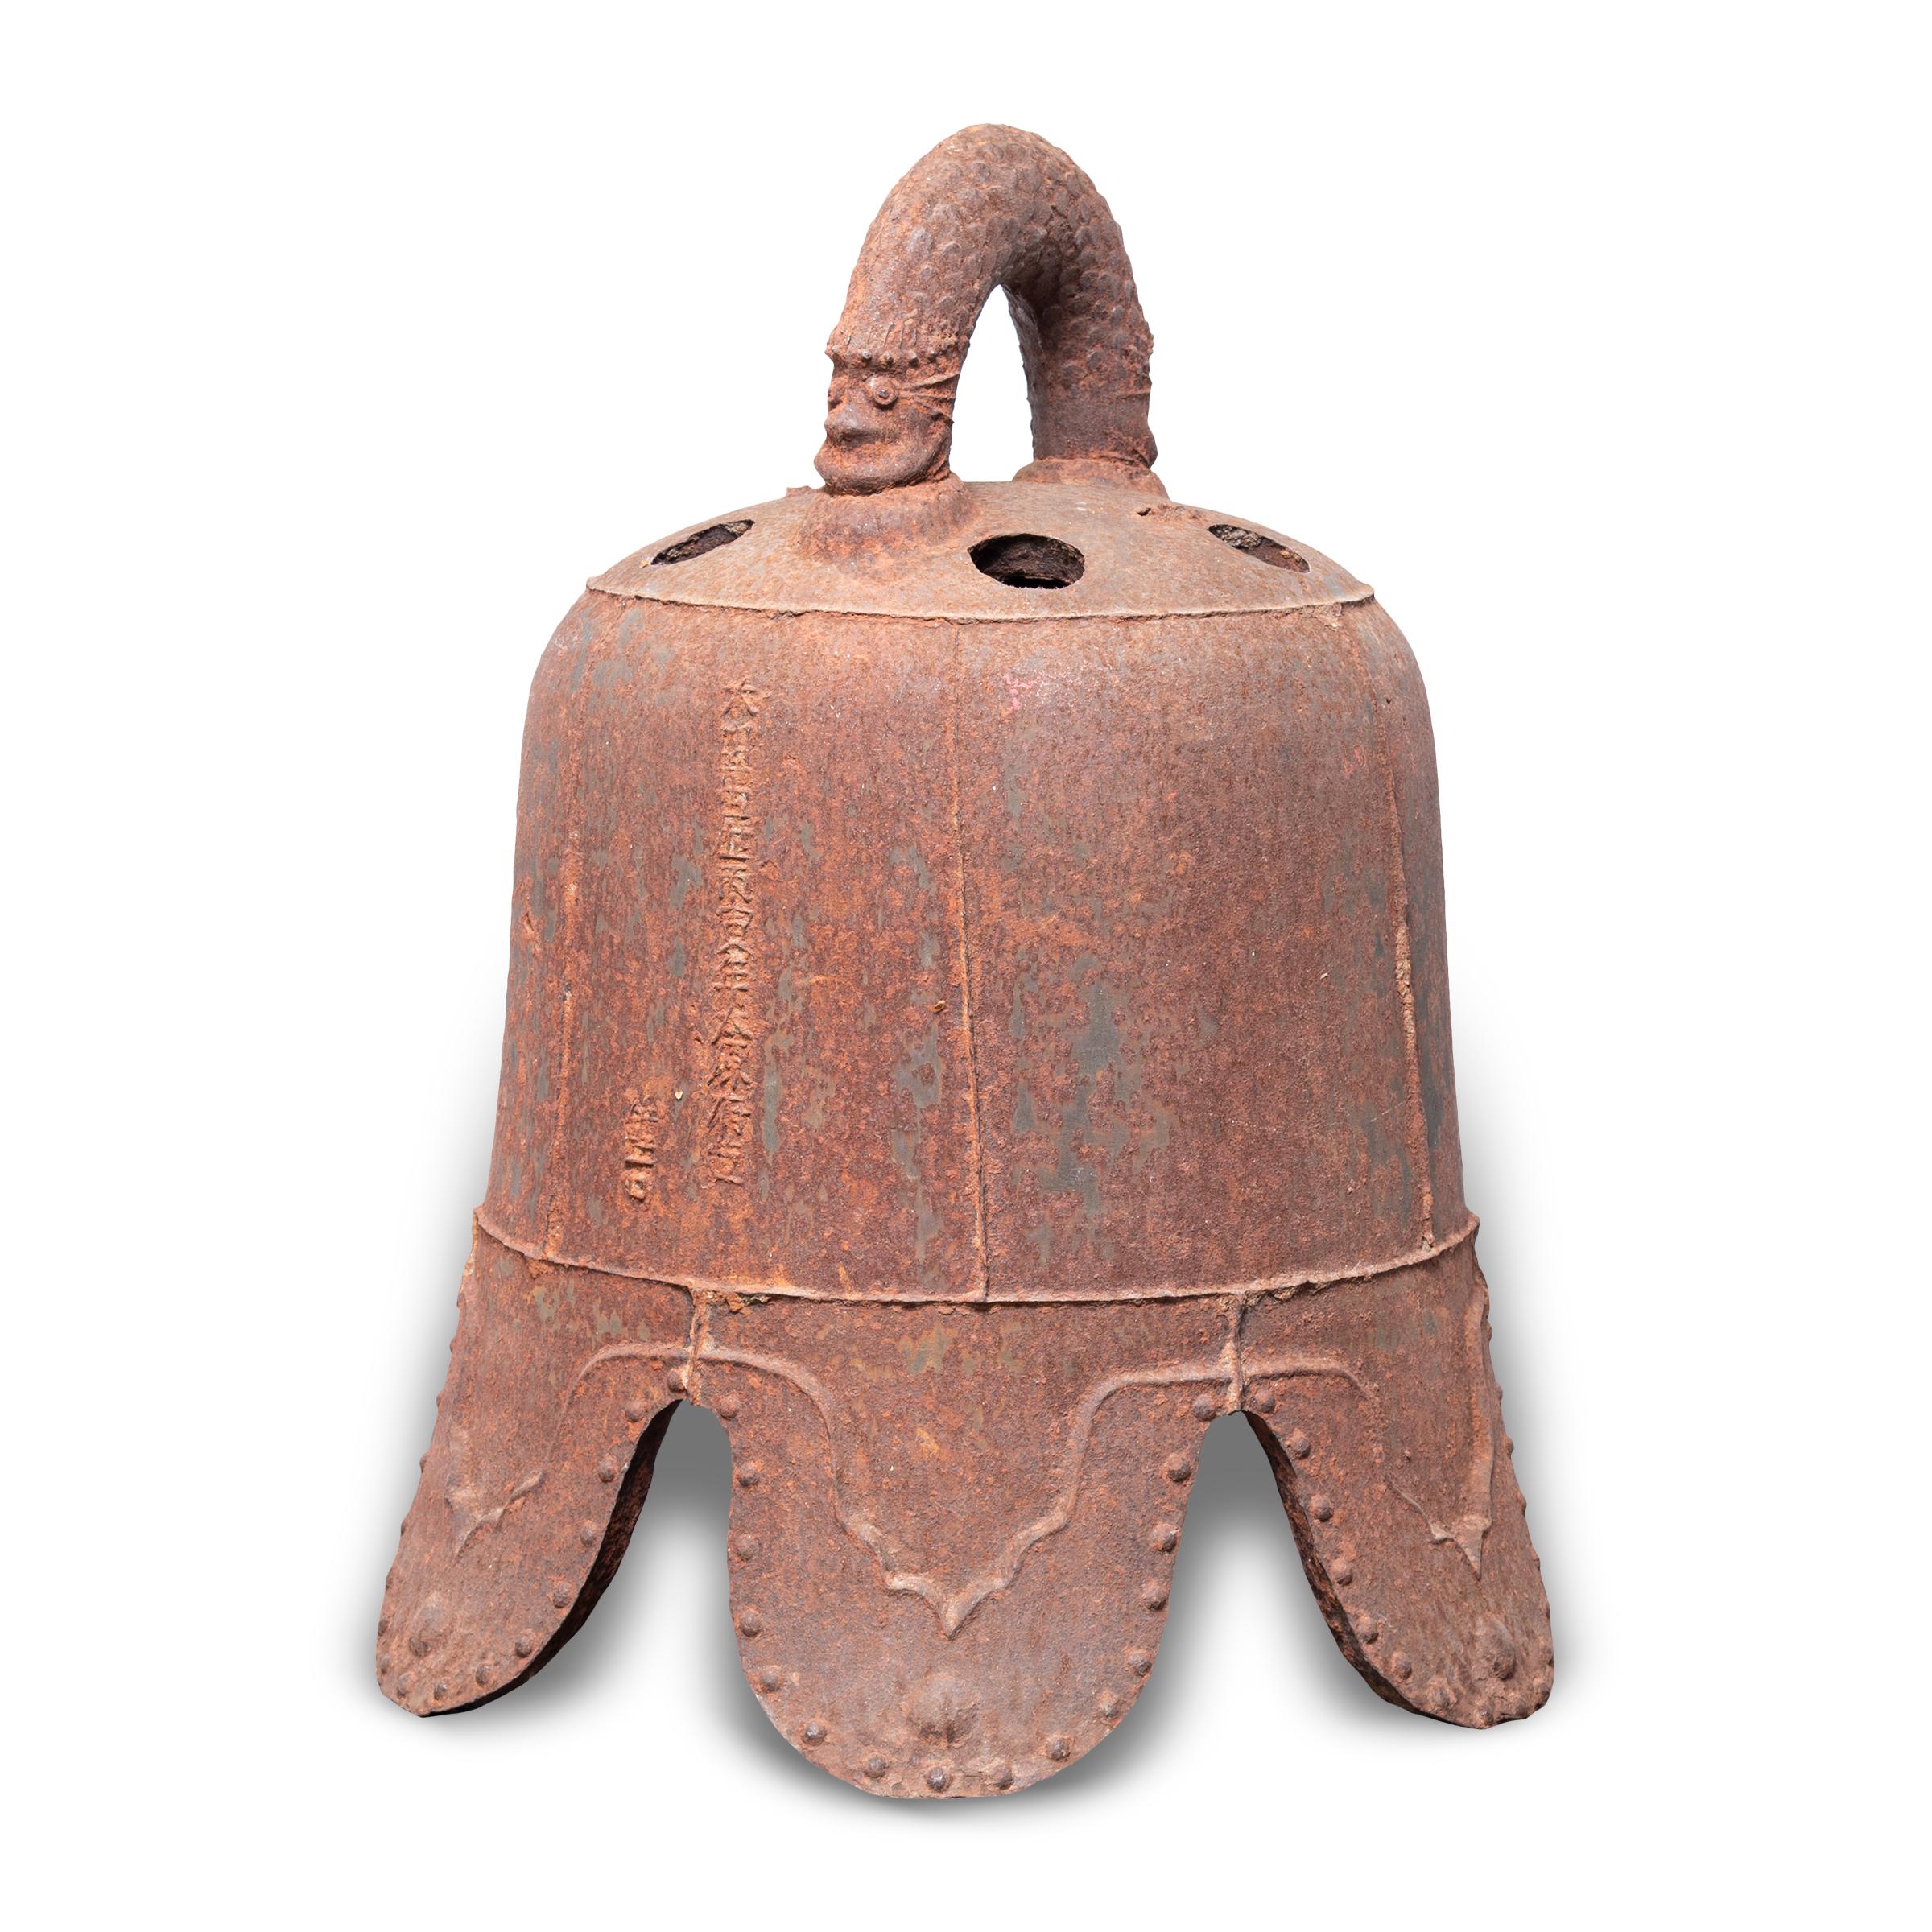 This monumental Ming-dynasty bell once pealed in a Chinese village, sounding out in celebration or giving notice of important events. Expertly forged, the cast-iron bell is detailed with characters in intricate relief, and its exaggerated scallop